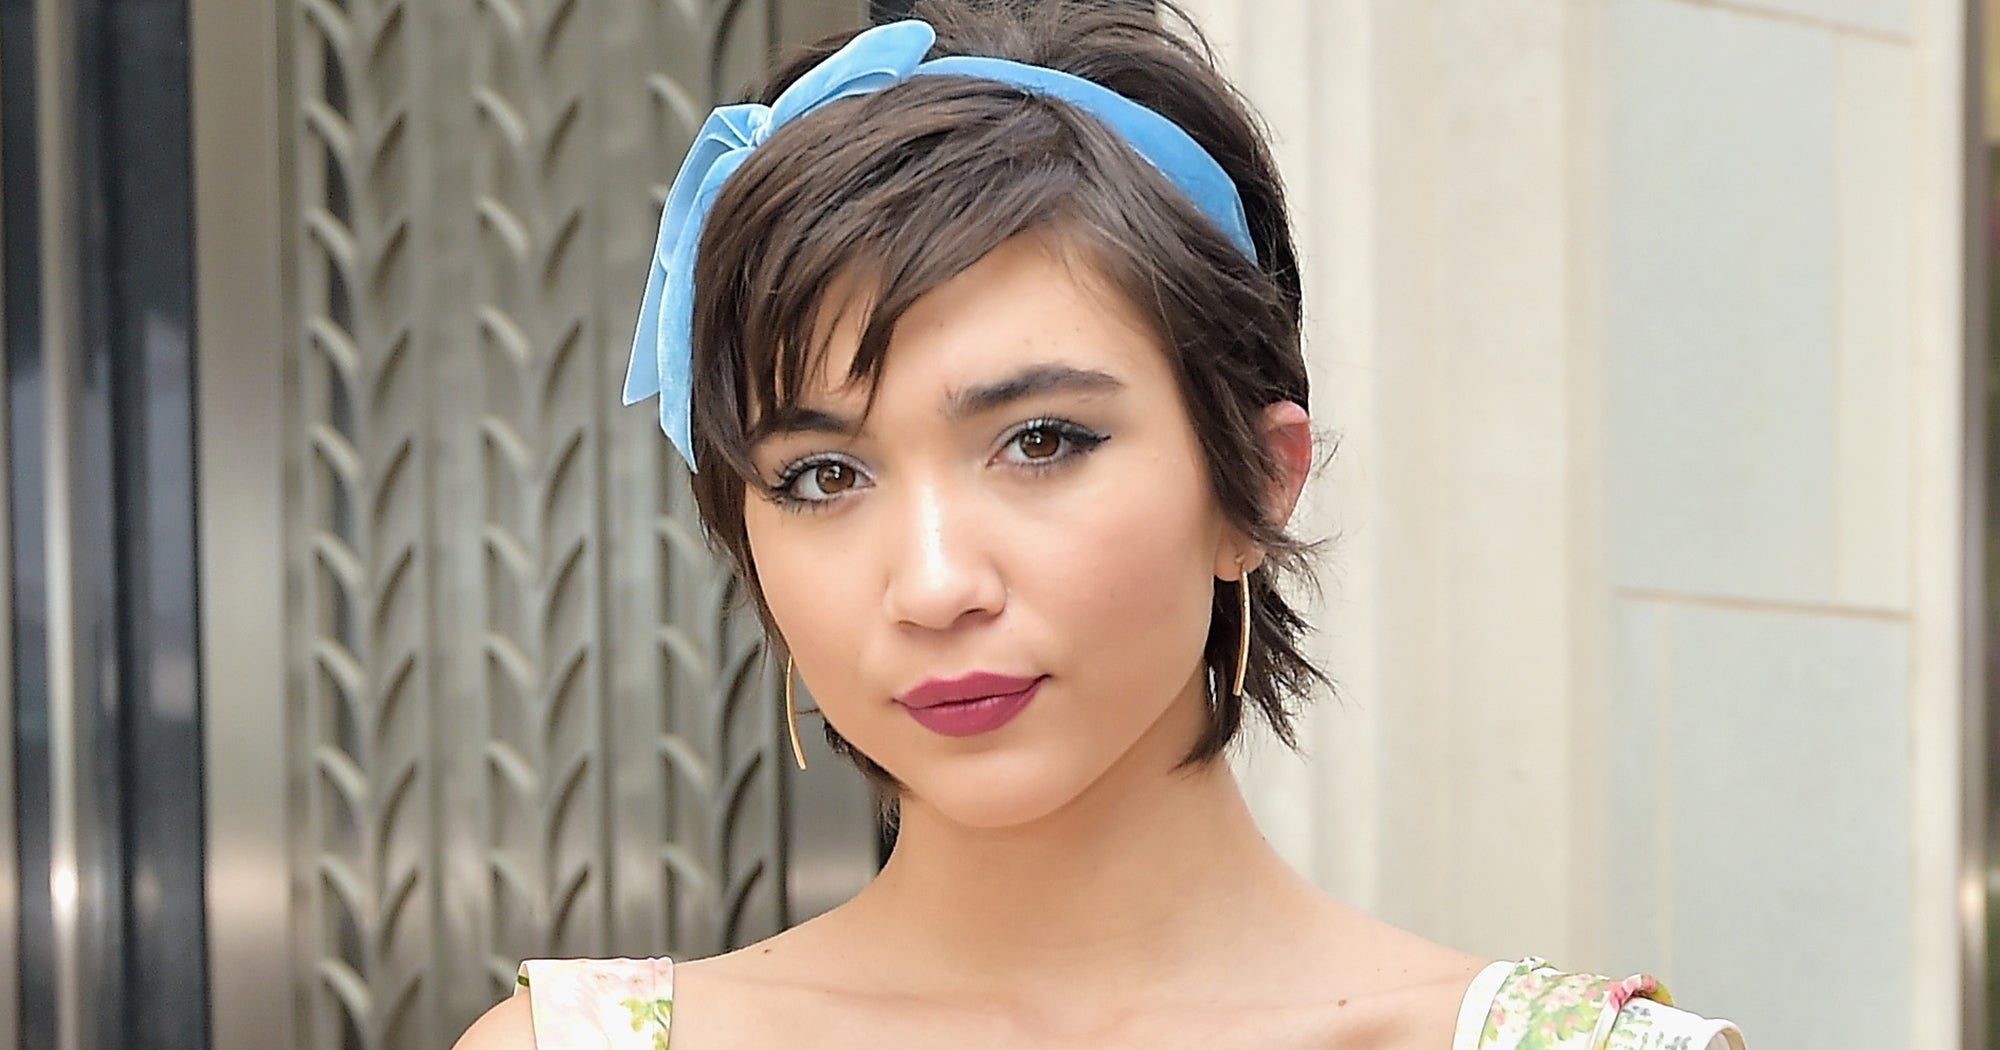 Best Updo For Short Hair That Are Chic, Simple, & Easy